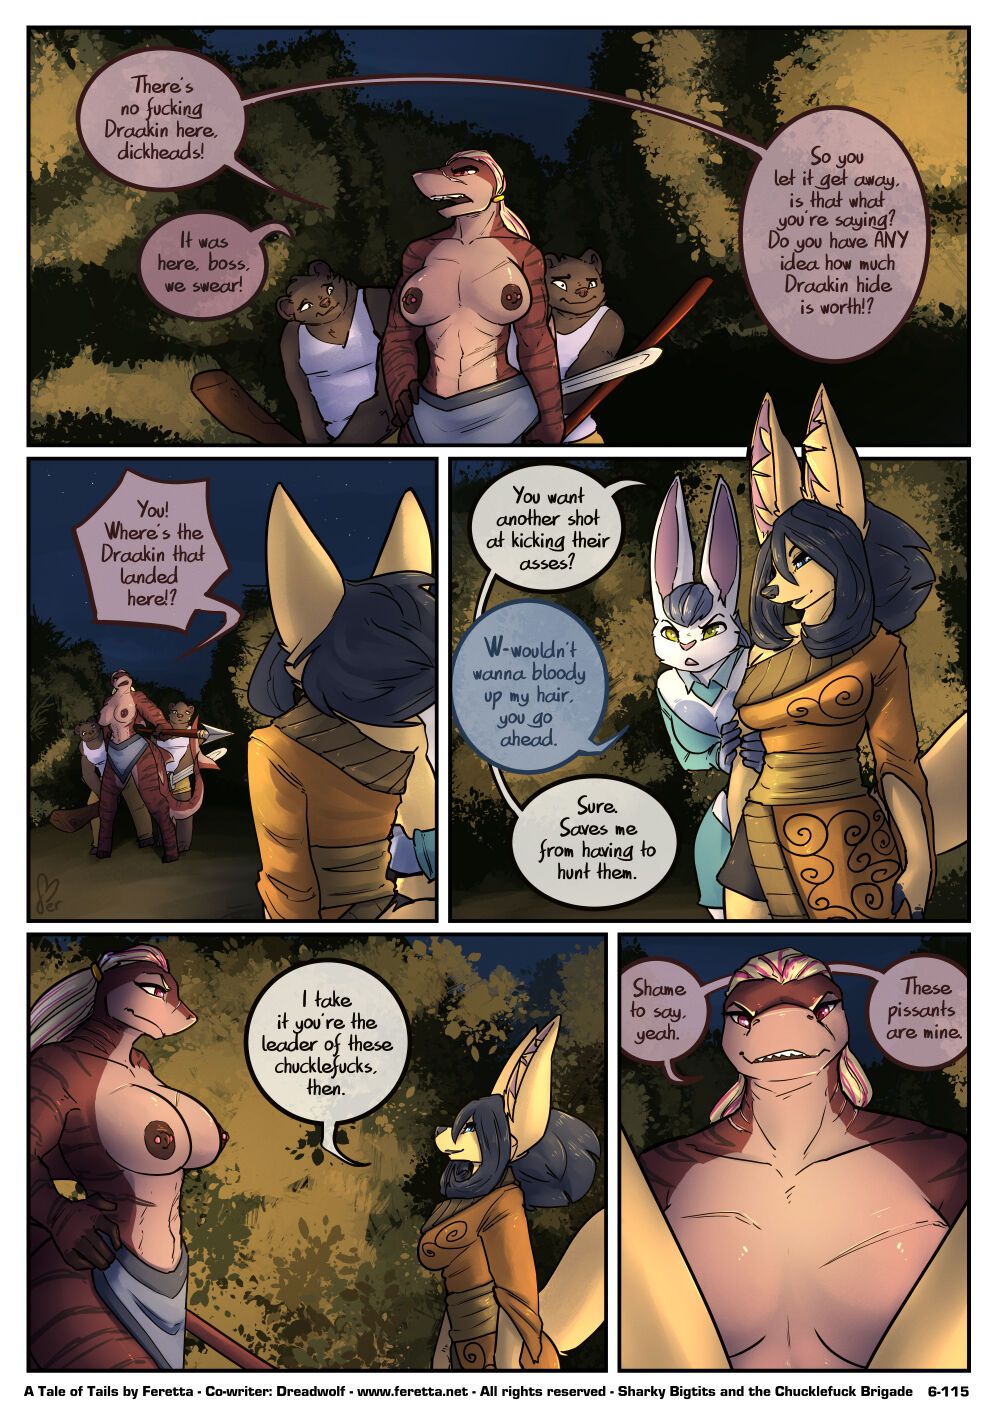 [Feretta] Farellian Legends: A Tale of Tails (w/Extras) [Ongoing] 410